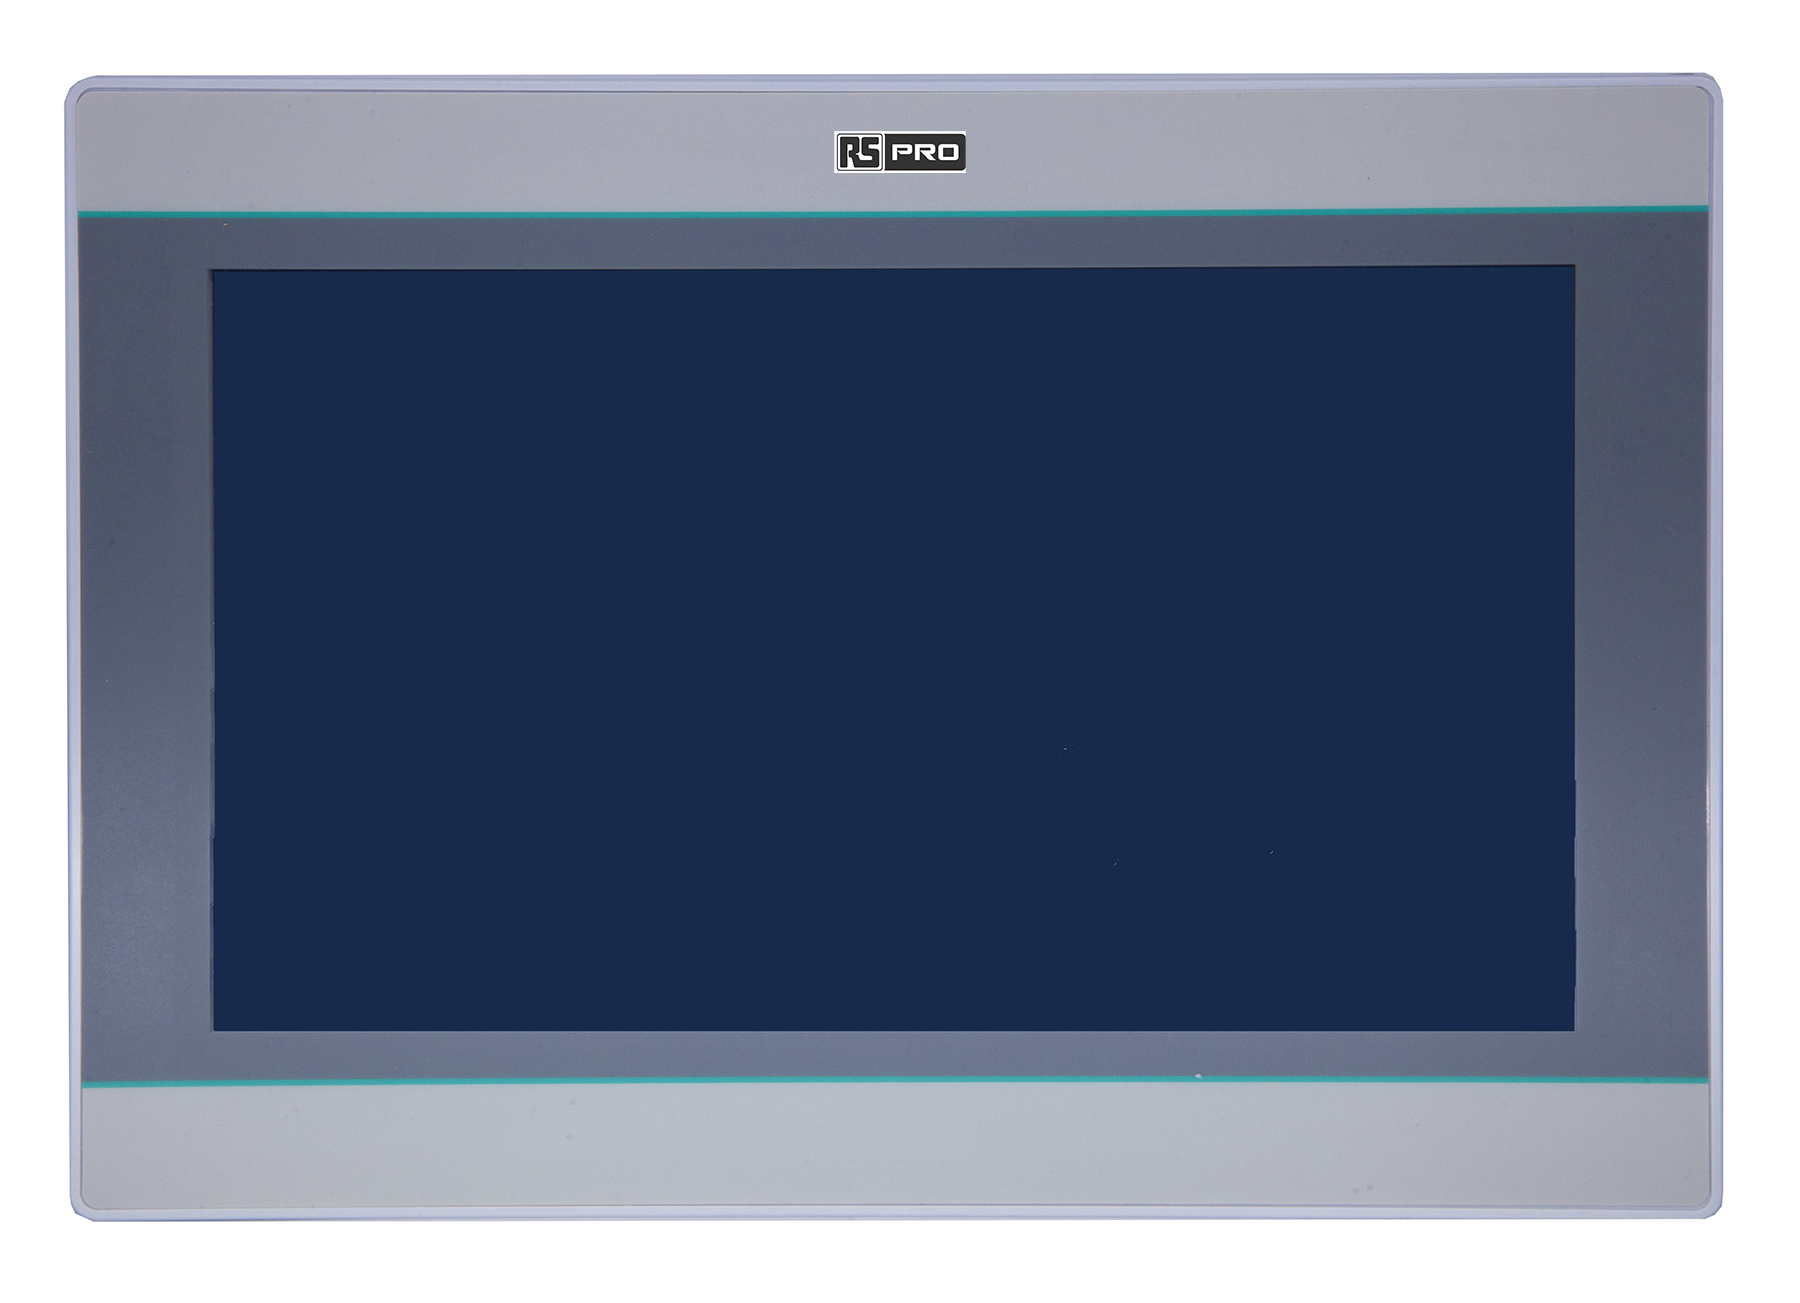 RS PRO 10,2 tommer TFT LCD Touchscreen, HMI Display Farve, 1024 x 600pixels USB, Ethernet, 272 x 192 x 41,5 mm